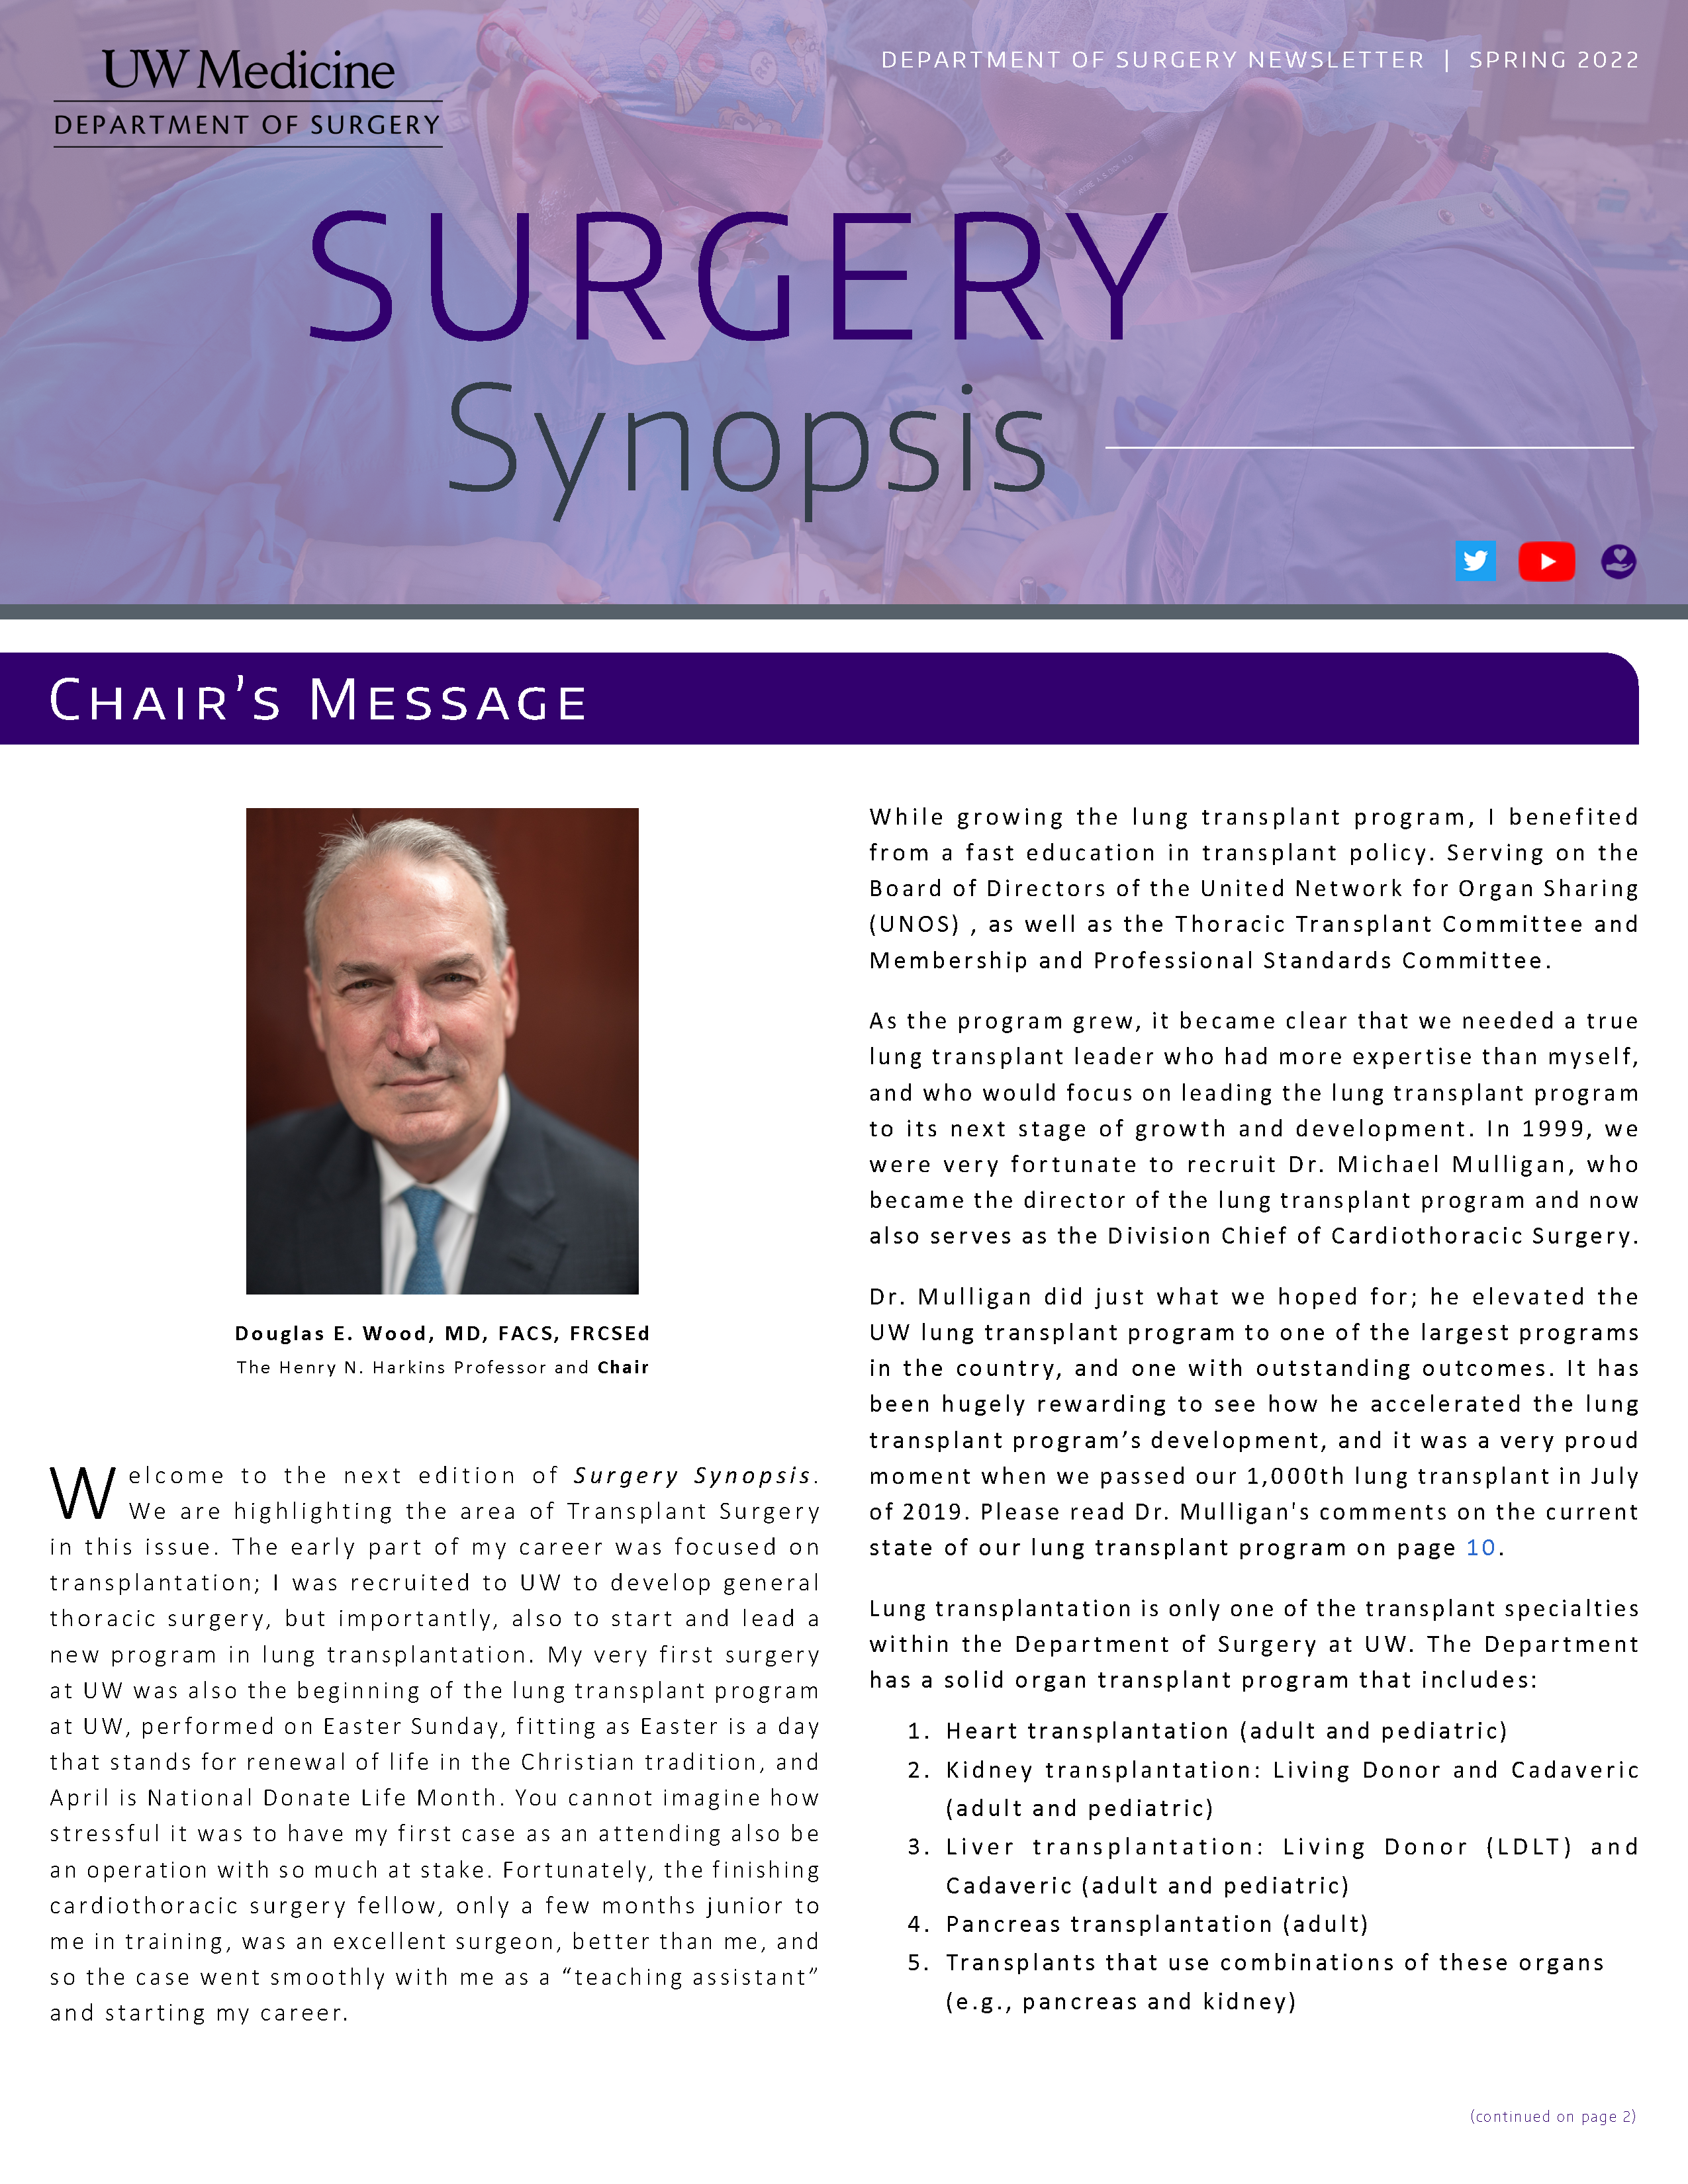 Surgery Synopsis Winter 2021 Issue Front Cover